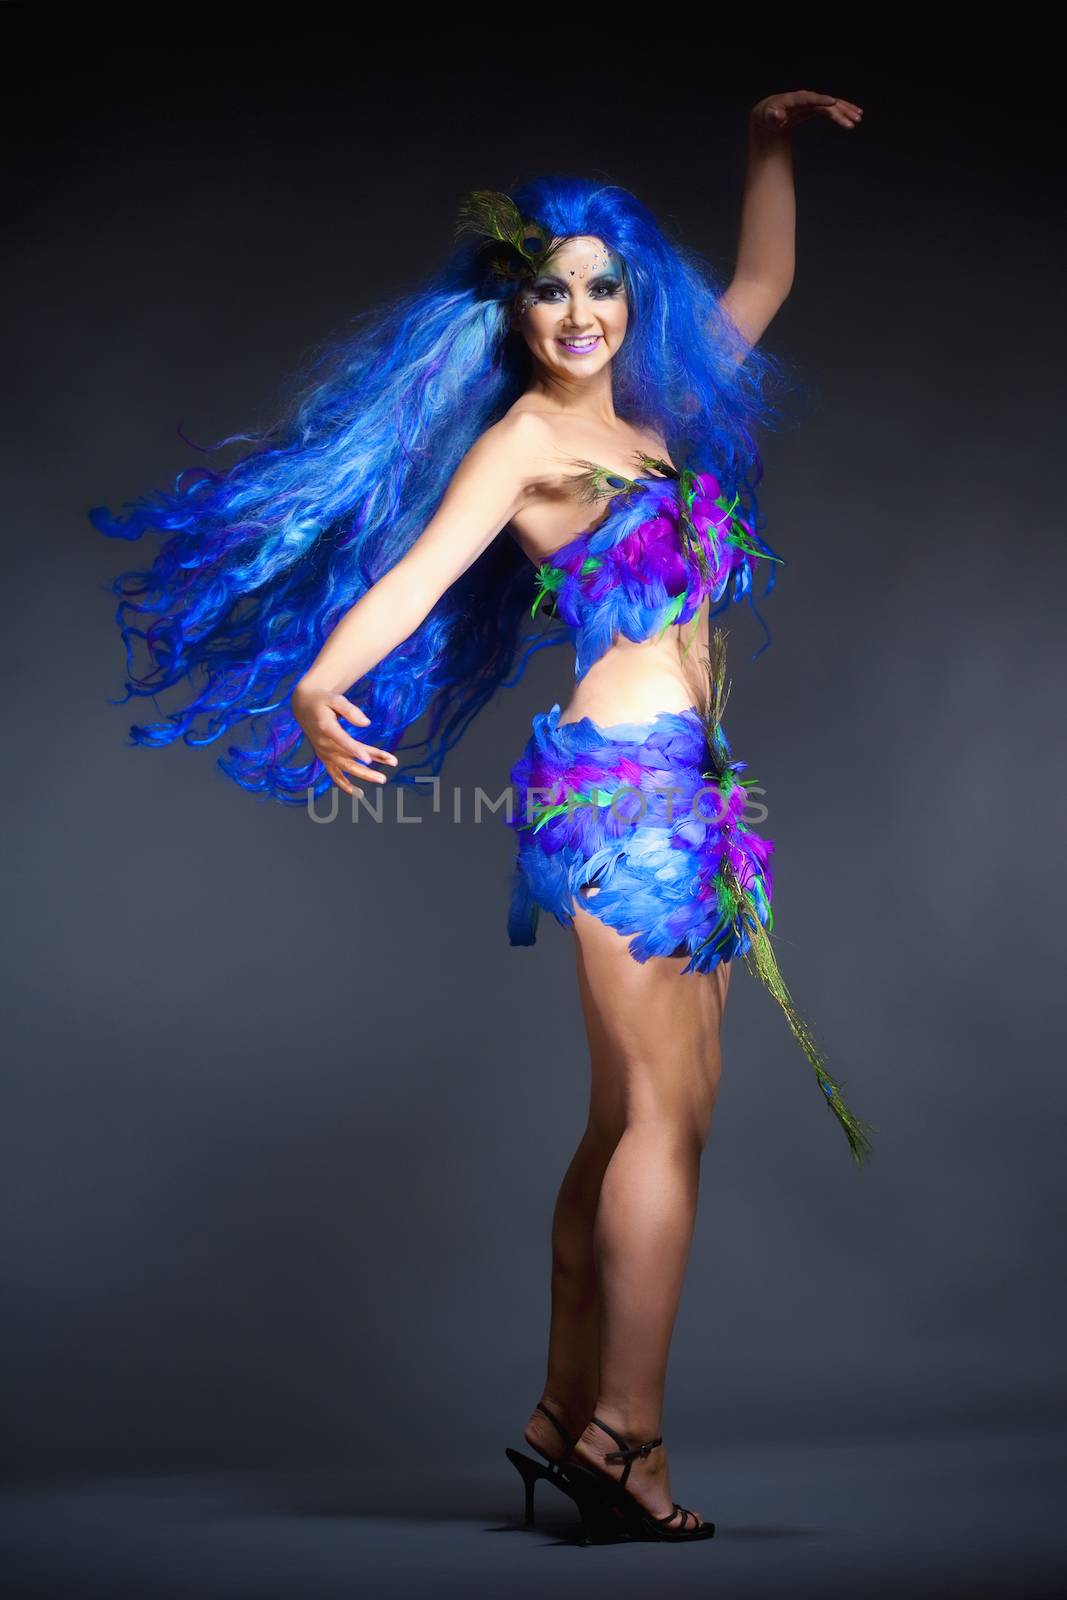 Portrait of a Woman in Blue Wig and Dress of Feathers by courtyardpix